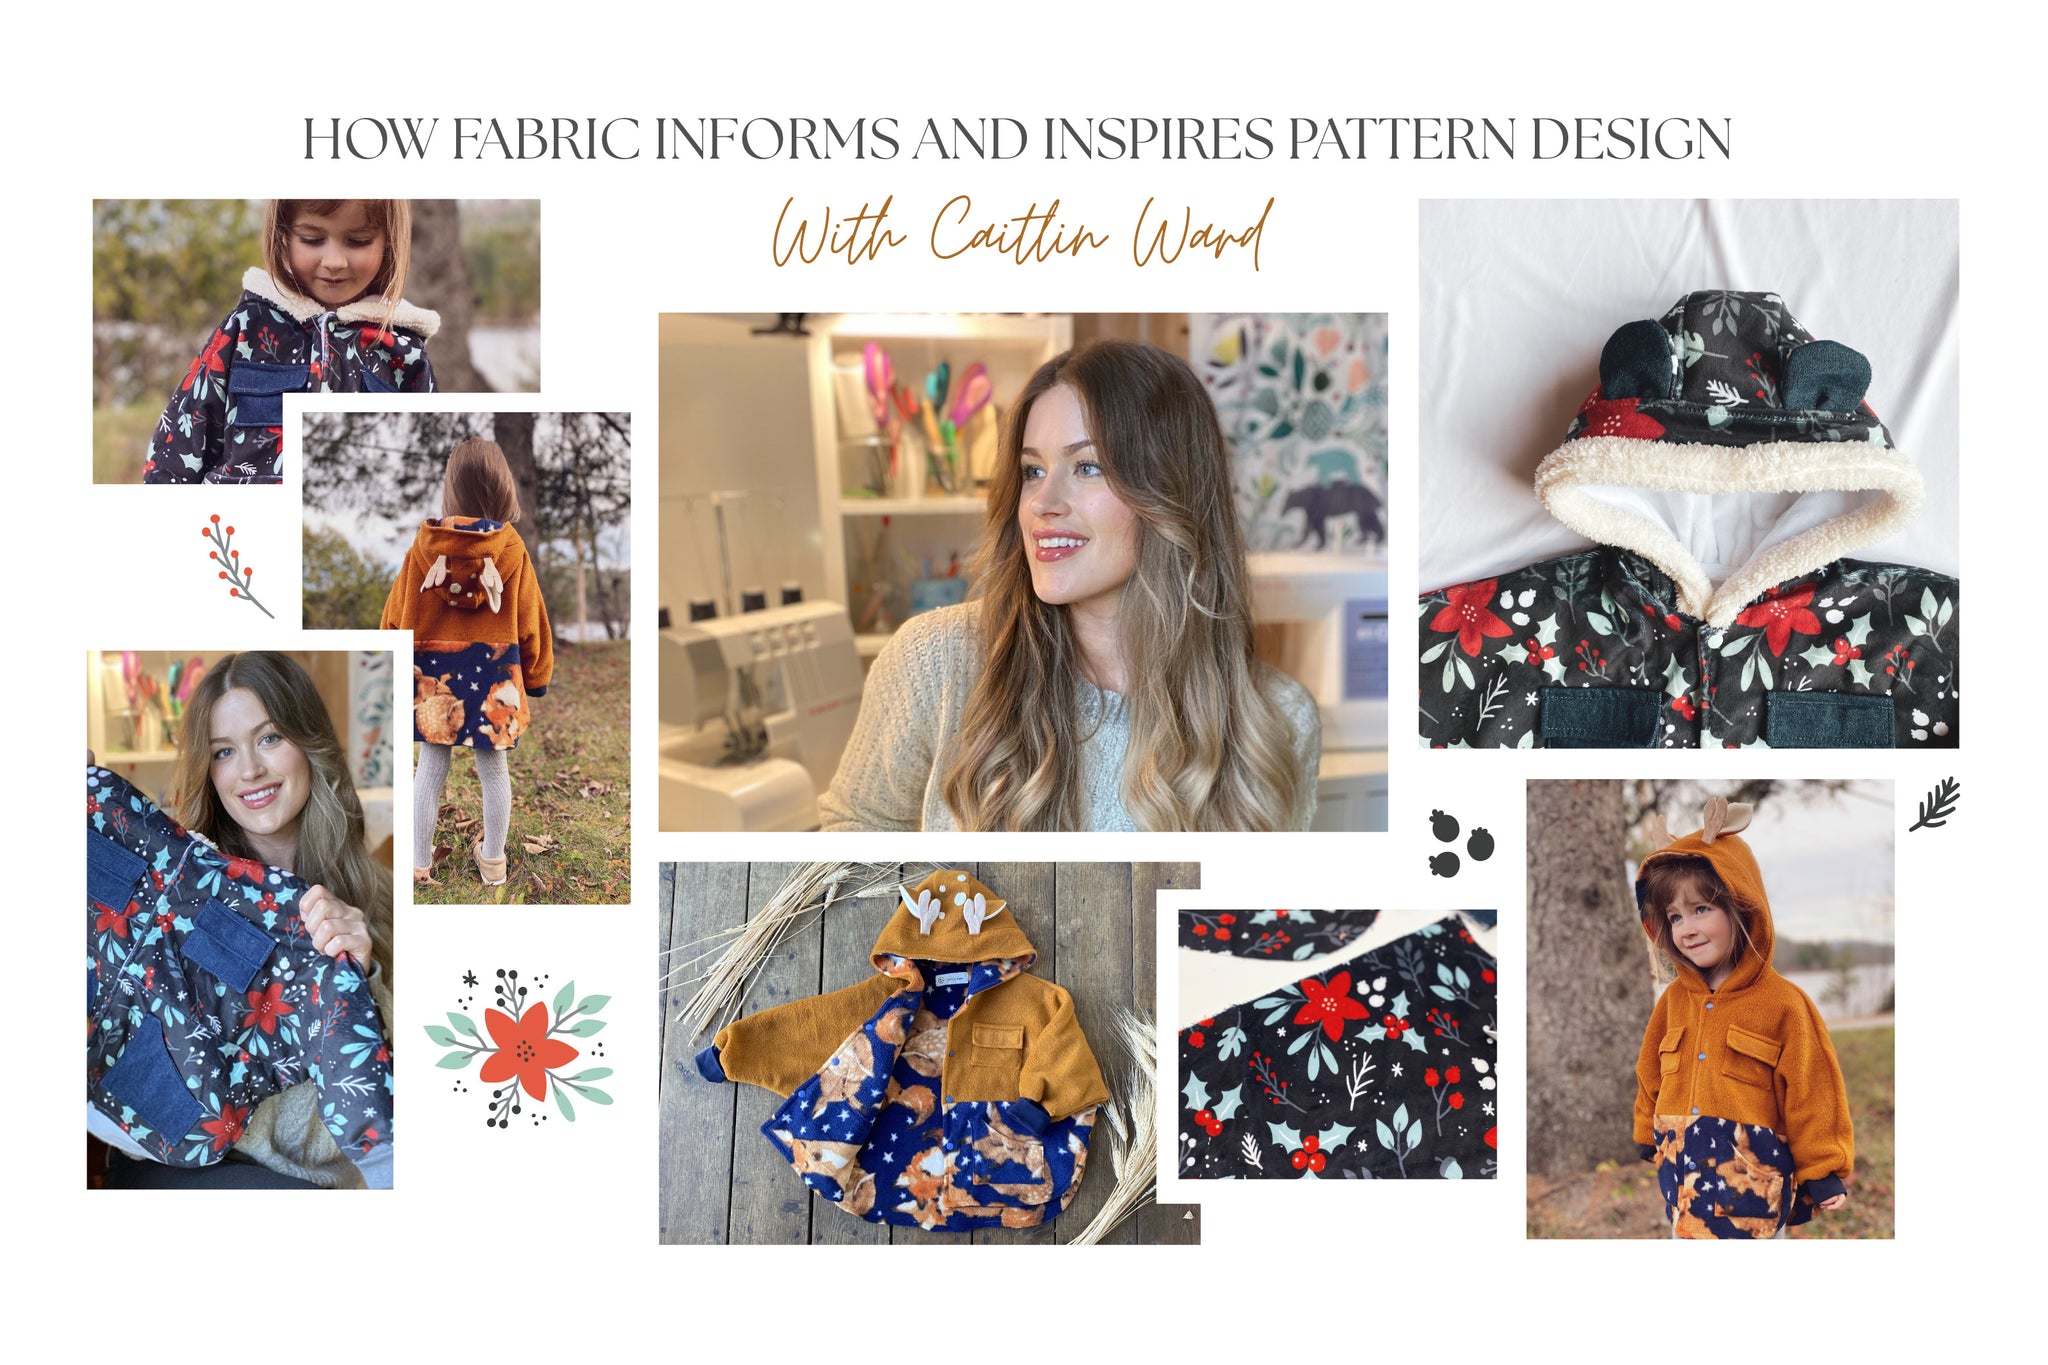 How Fabric Informs and Inspires Pattern Design with Caitlin Ward